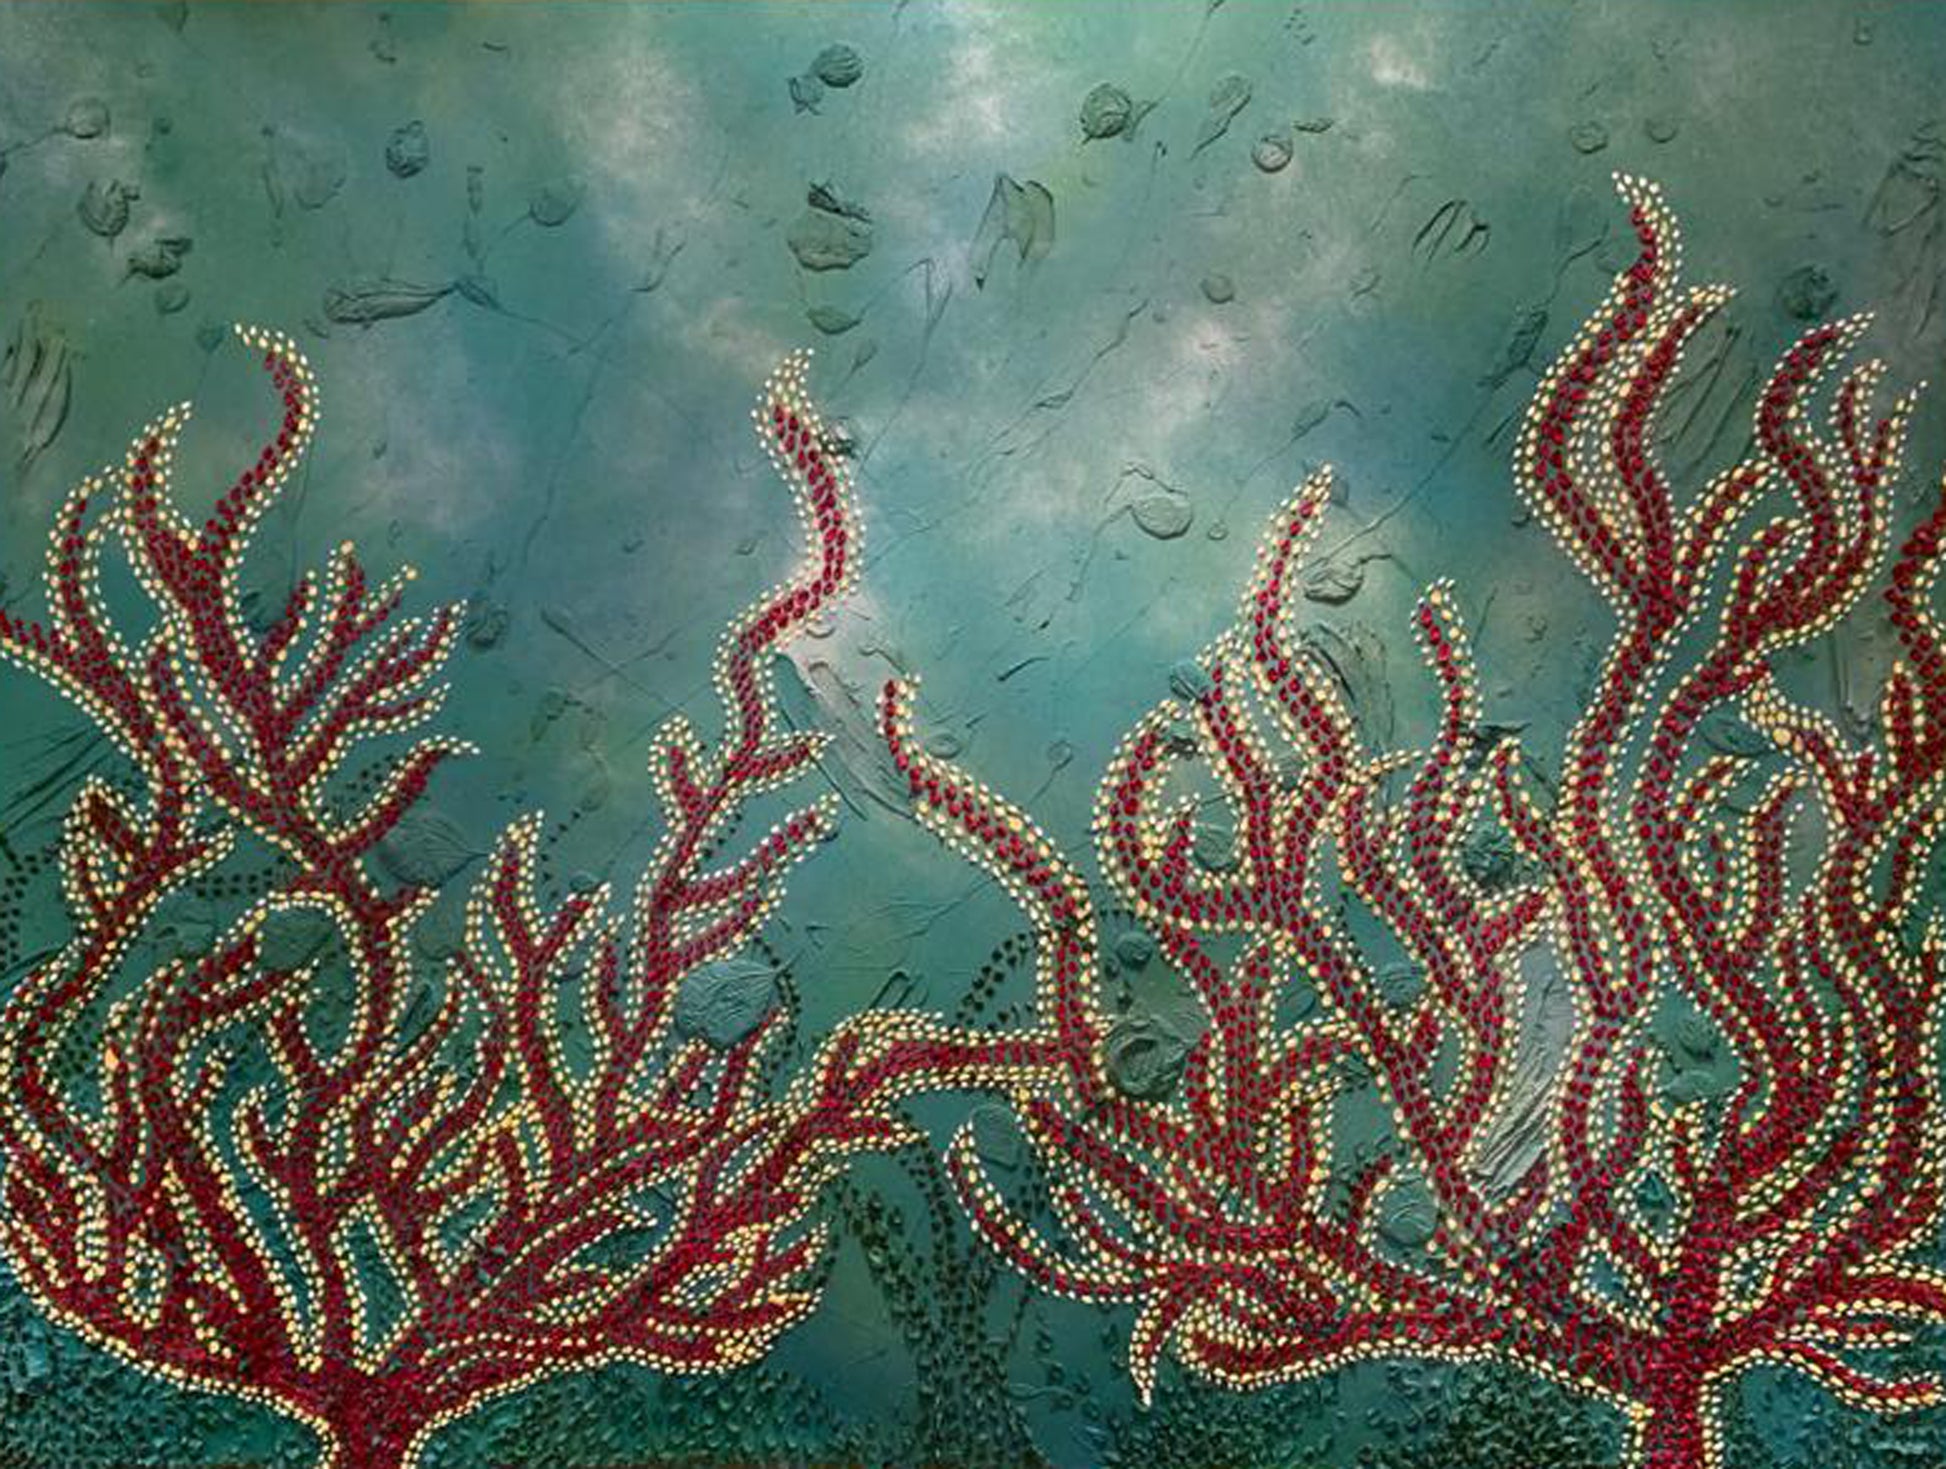 Under-the-Sea-by-Alexandra-Romano-Toronto-Art-Gallery-Textured-Sea-Ocean-Oil-Abstract-Impressionism-Painting